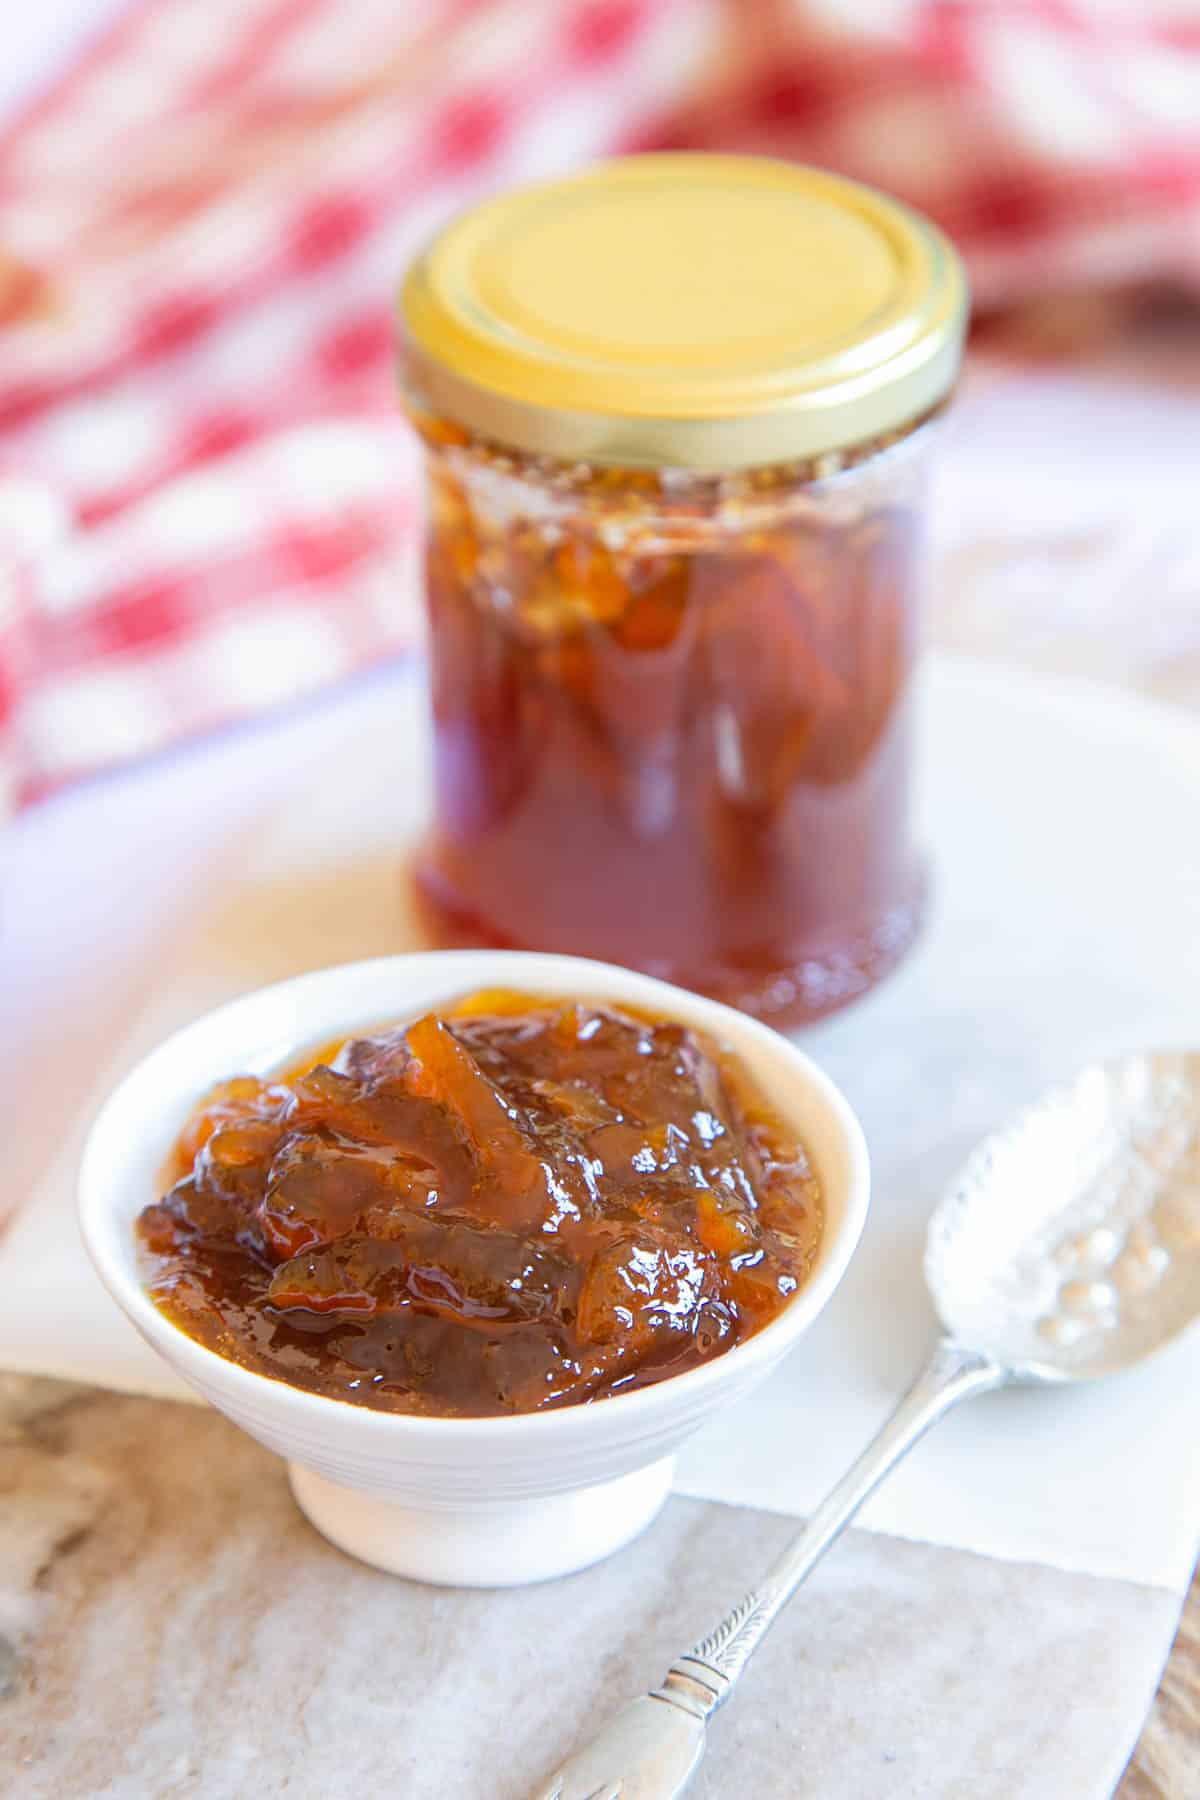 A close up of a small dish filled with marmalade. More marmalade in a jam jar is in the background.